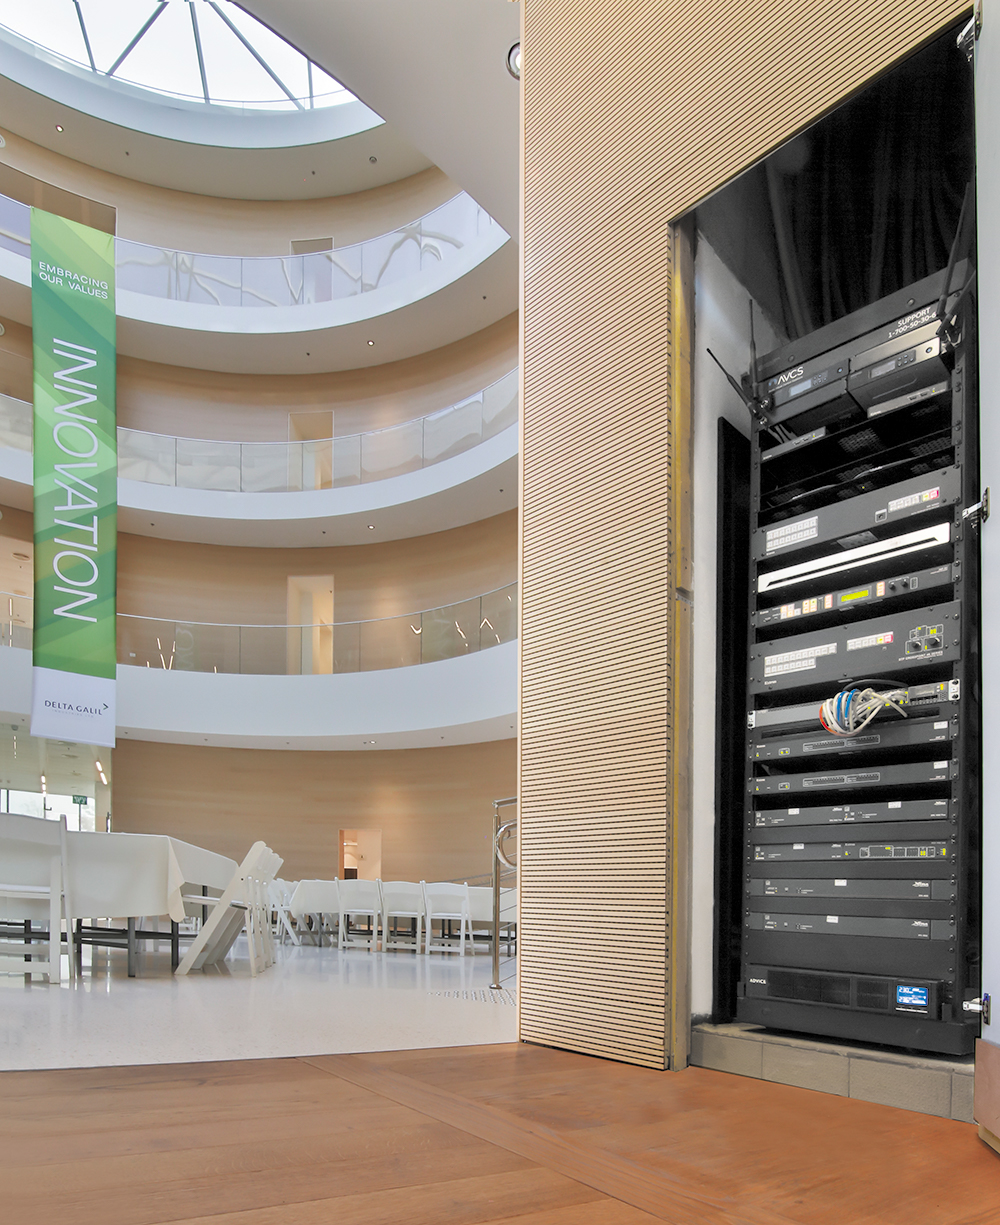 A DTP CrossPoint 108 4K IPCP MA 70 scaling presentation matrix switcher installed in a closet outside of the auditorium routes audio, video, and control signals for both the auditorium and the boardroom.